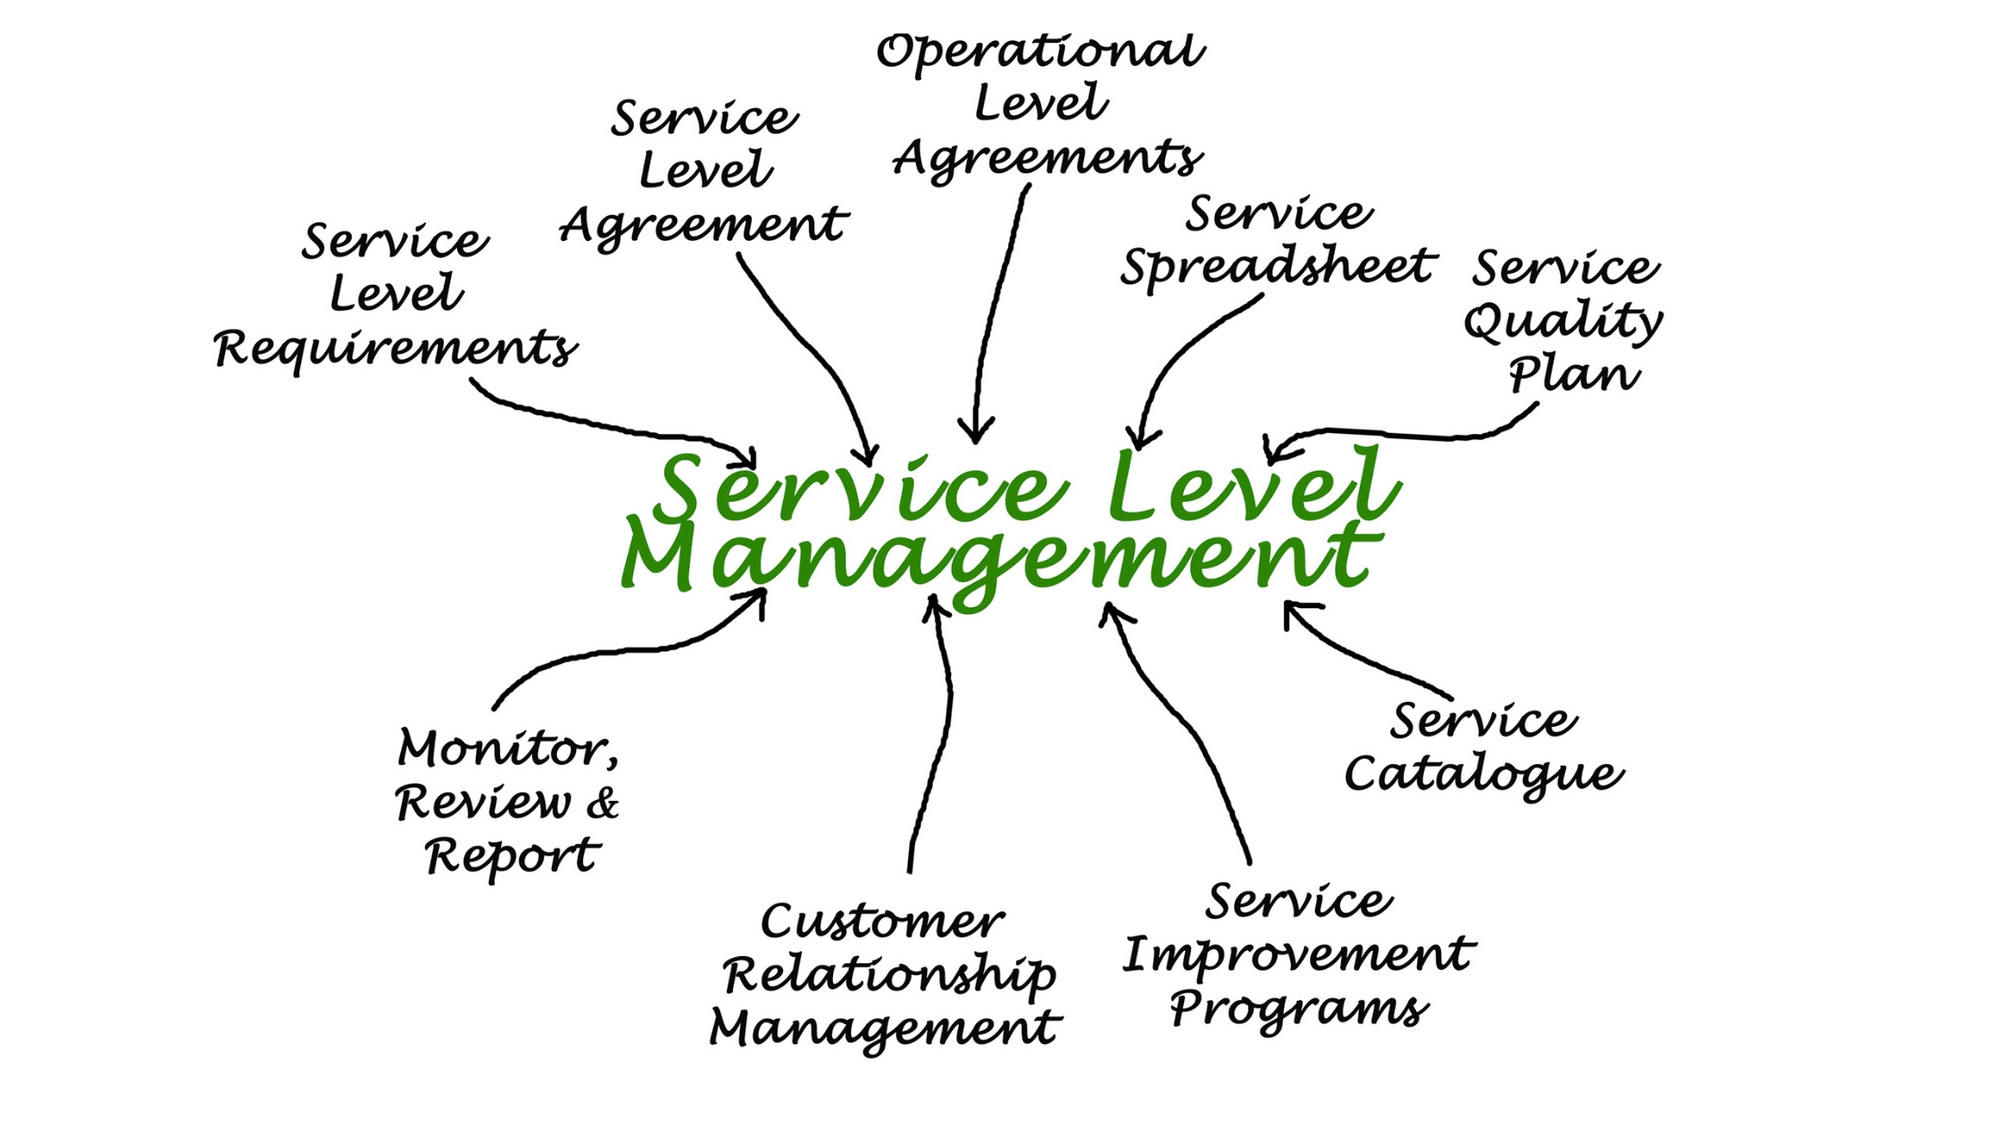 What does Service Level Management (SLM) Do In ITIL?